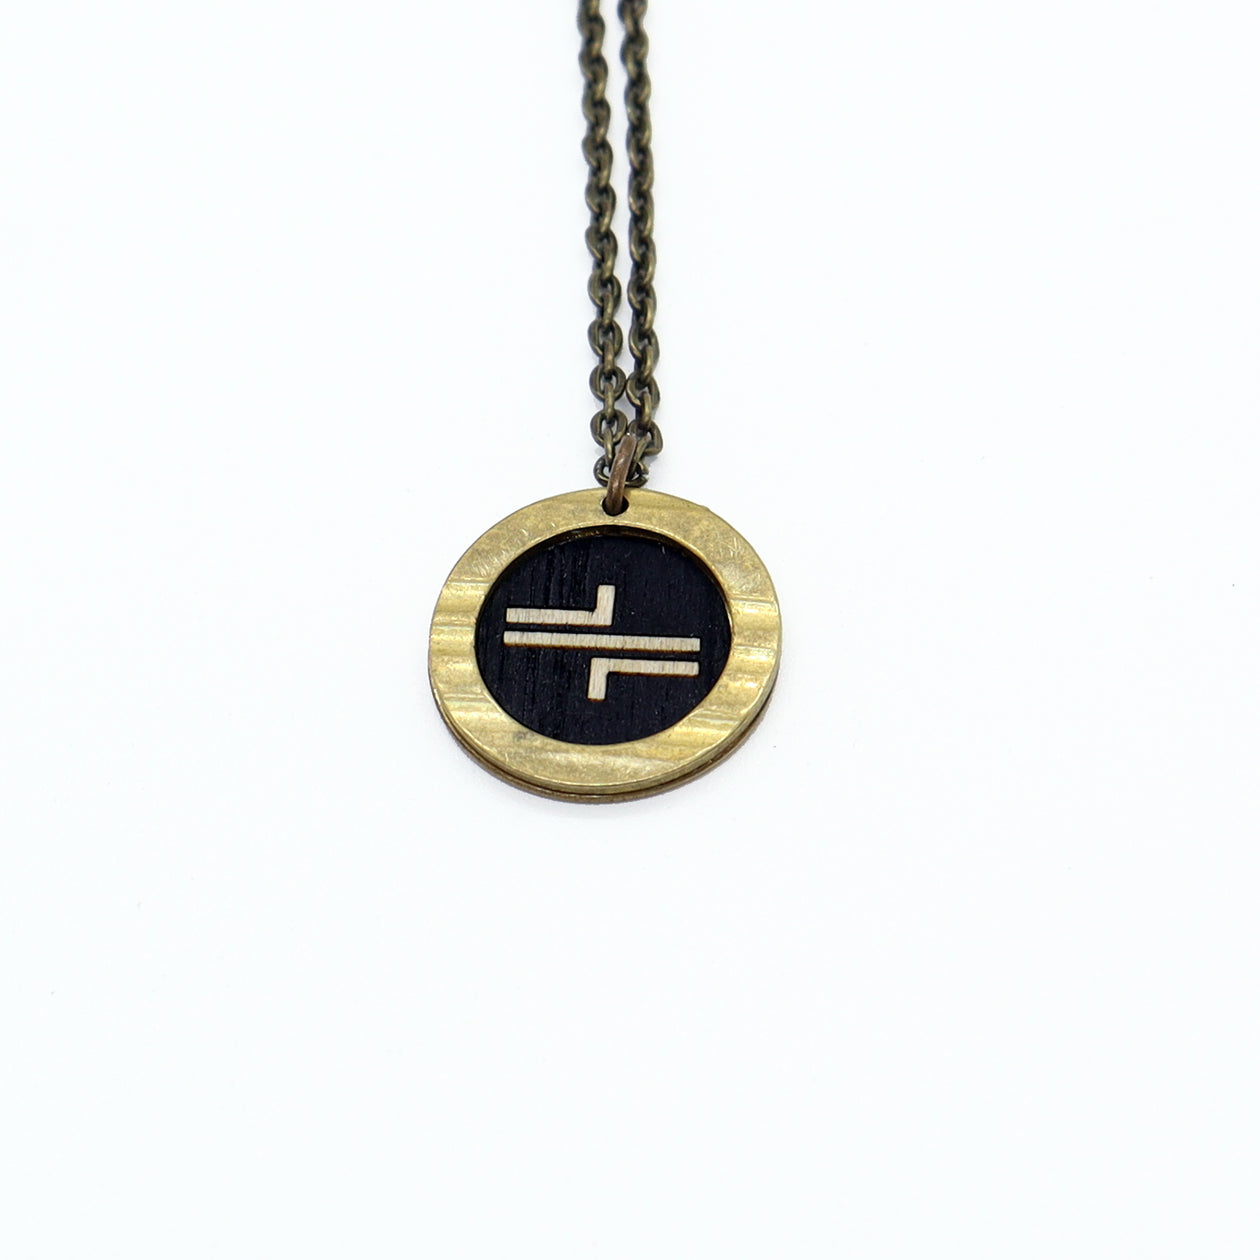 Thrice Bronze Inlay - Reclaimed Cymbal Necklace